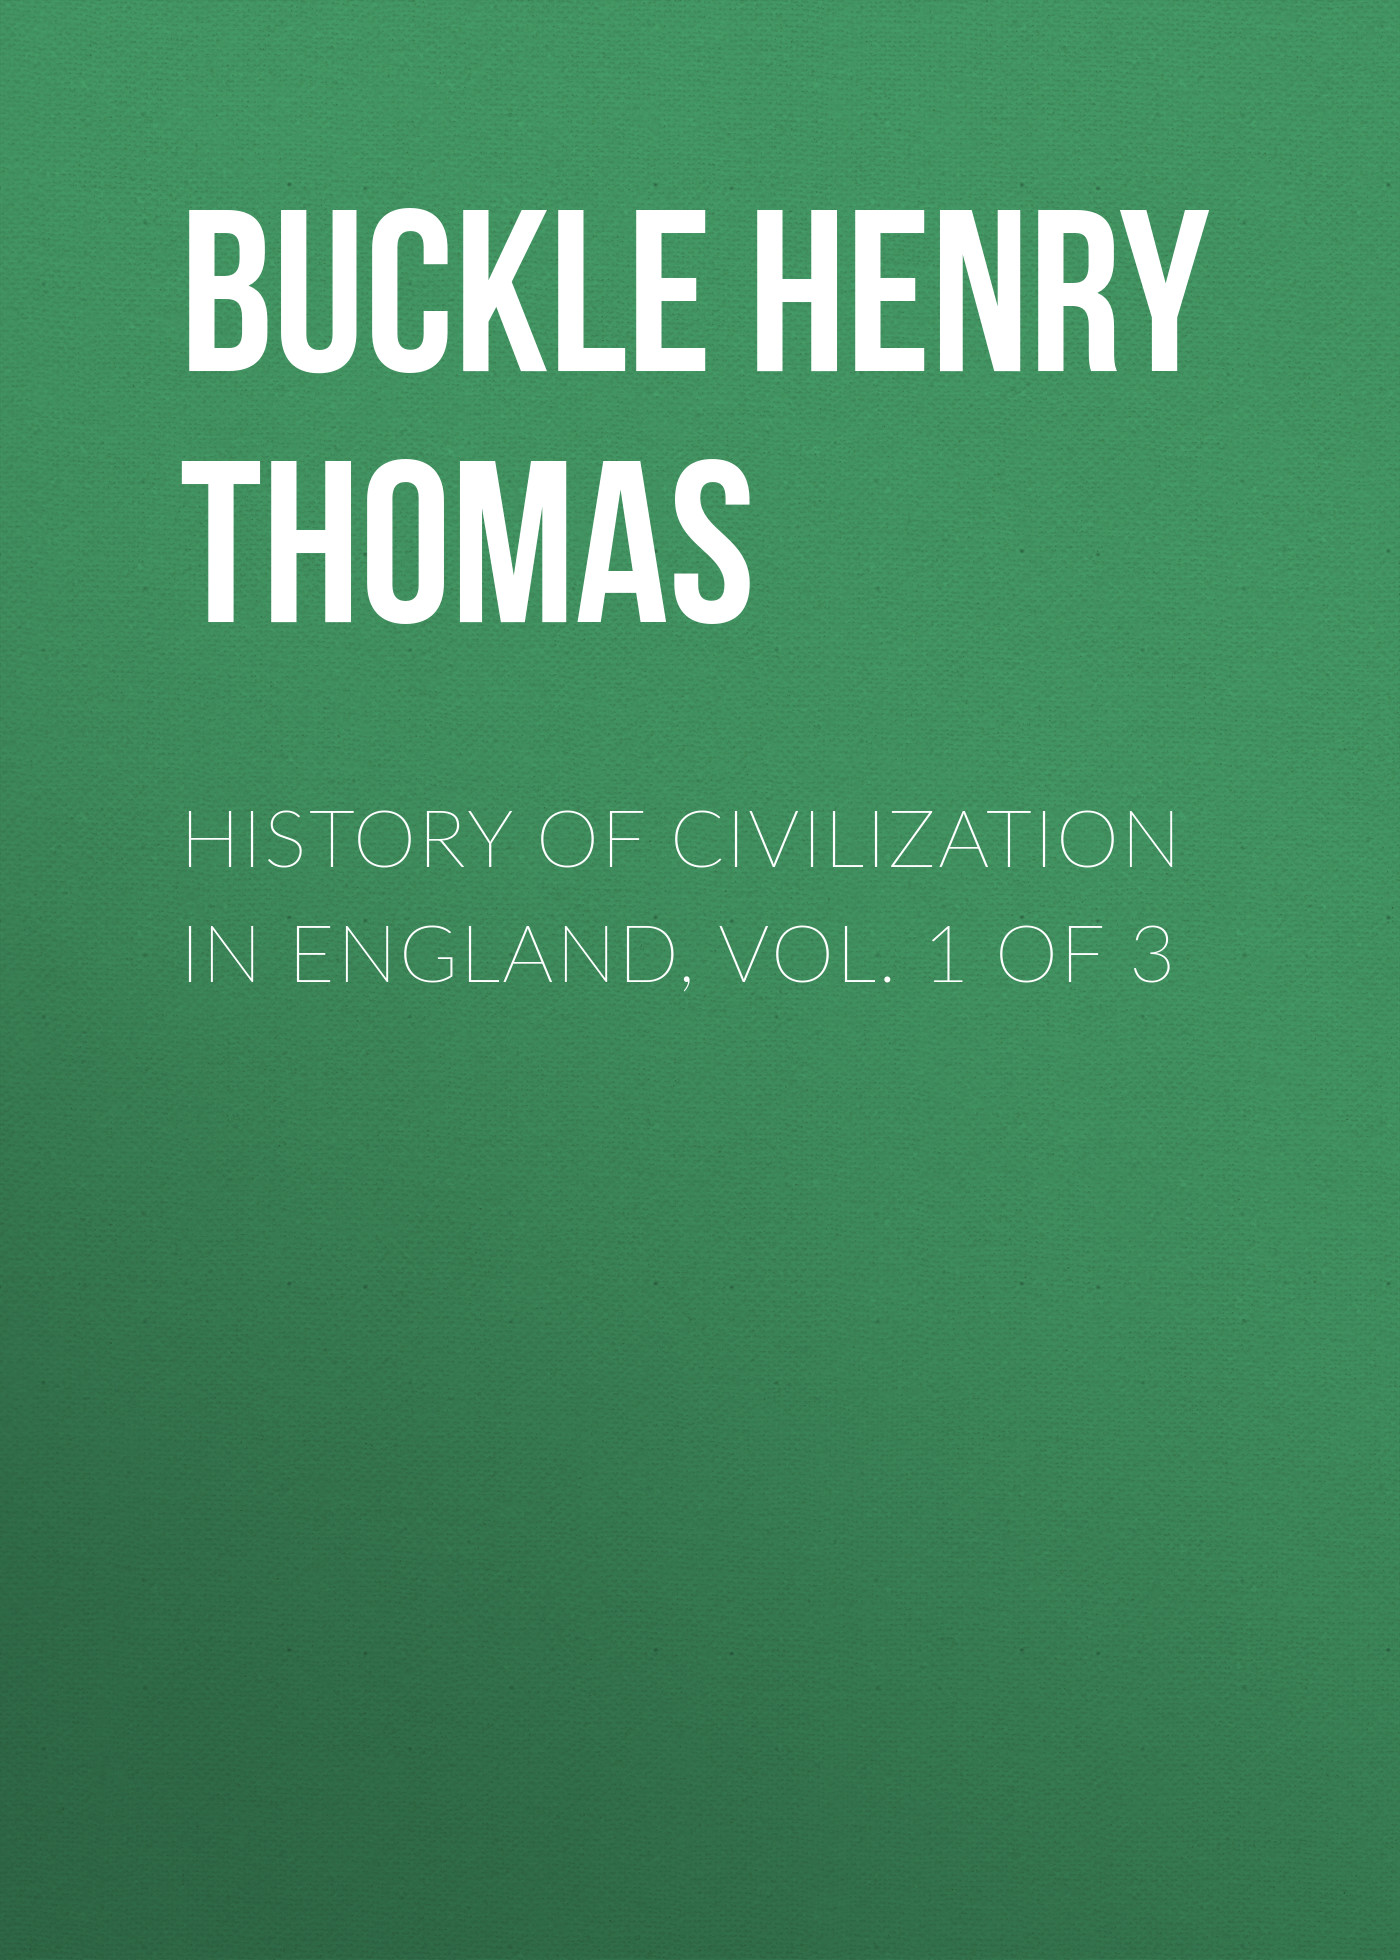 History of Civilization in England, Vol. 1 of 3